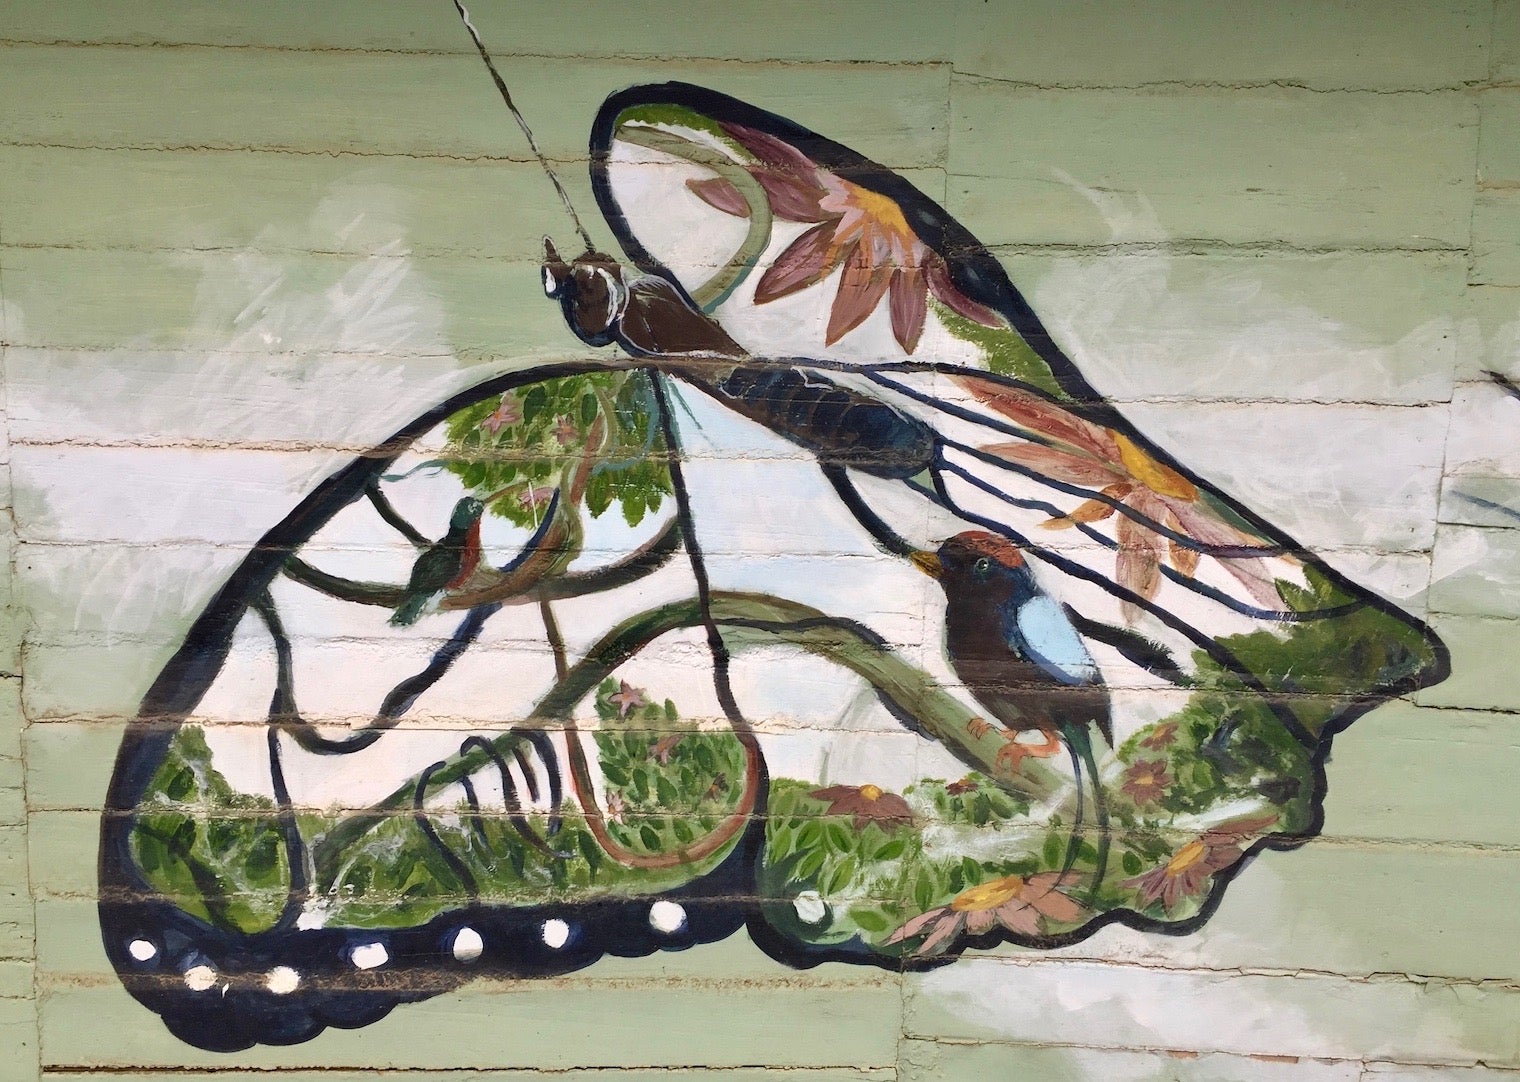 Mural in costa rica of popular birds inside a butterfly painting